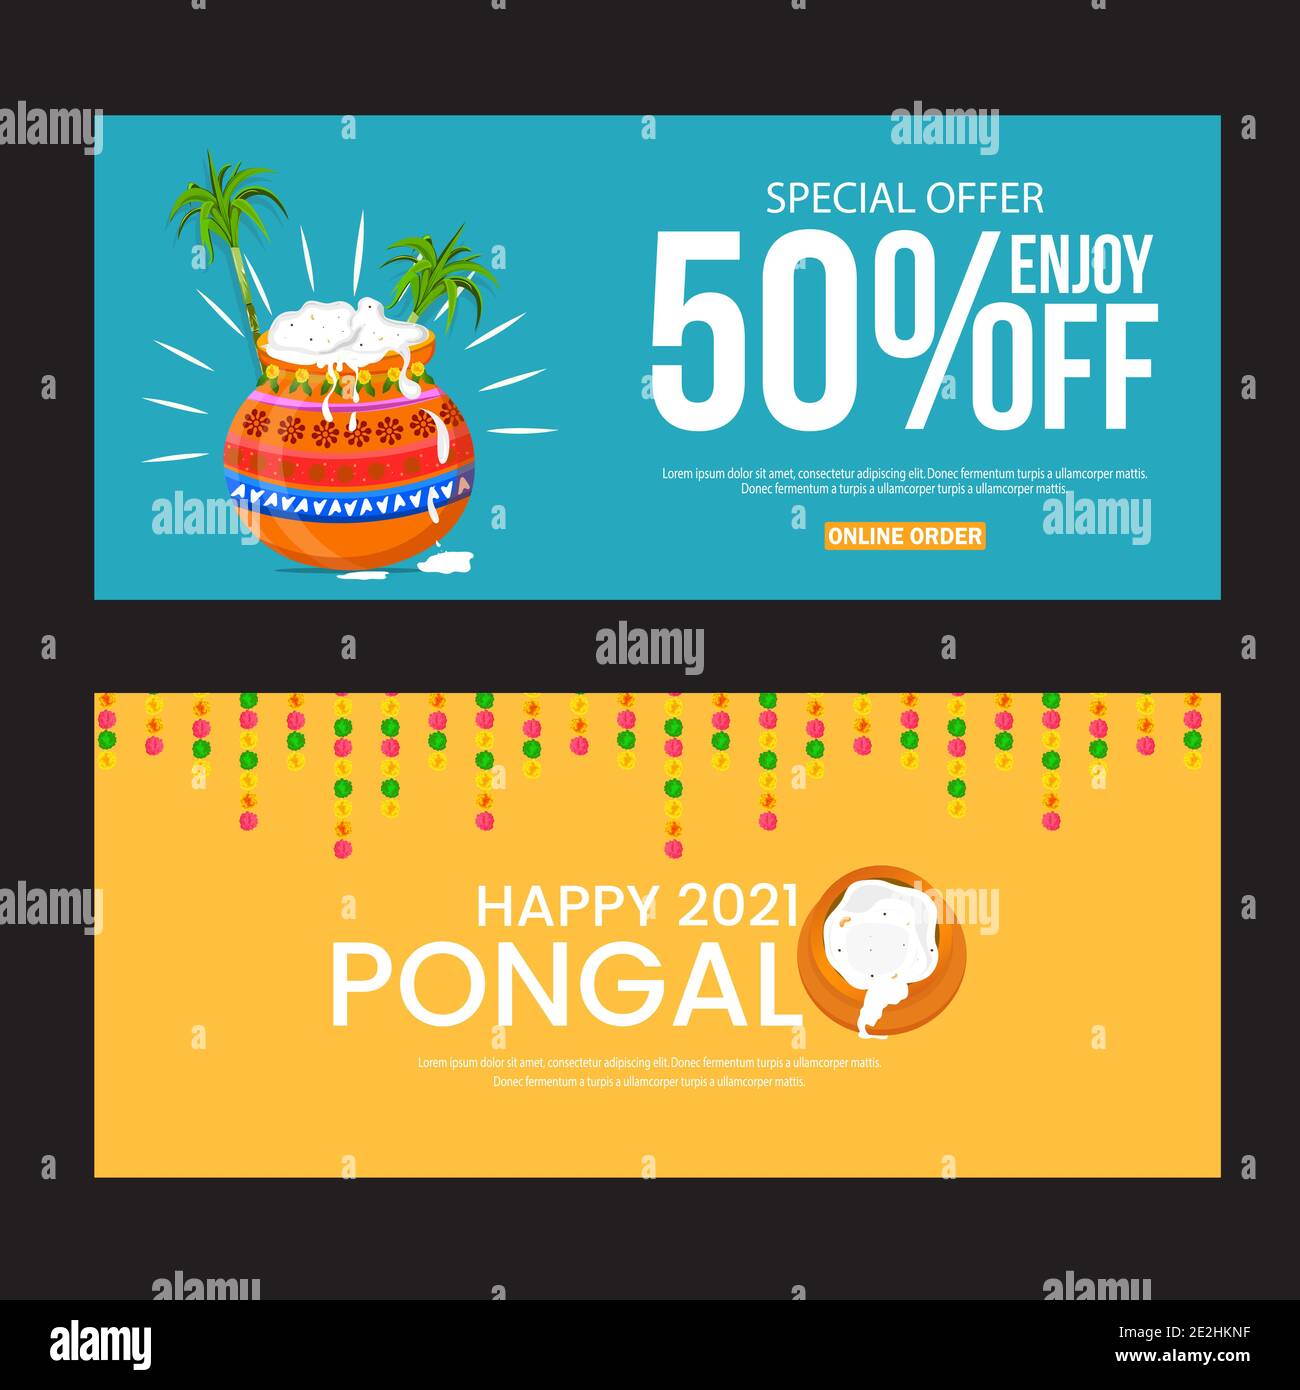 Banners set for traditional Indian festival Pongal. Happy Pongal greeting background Stock Vector